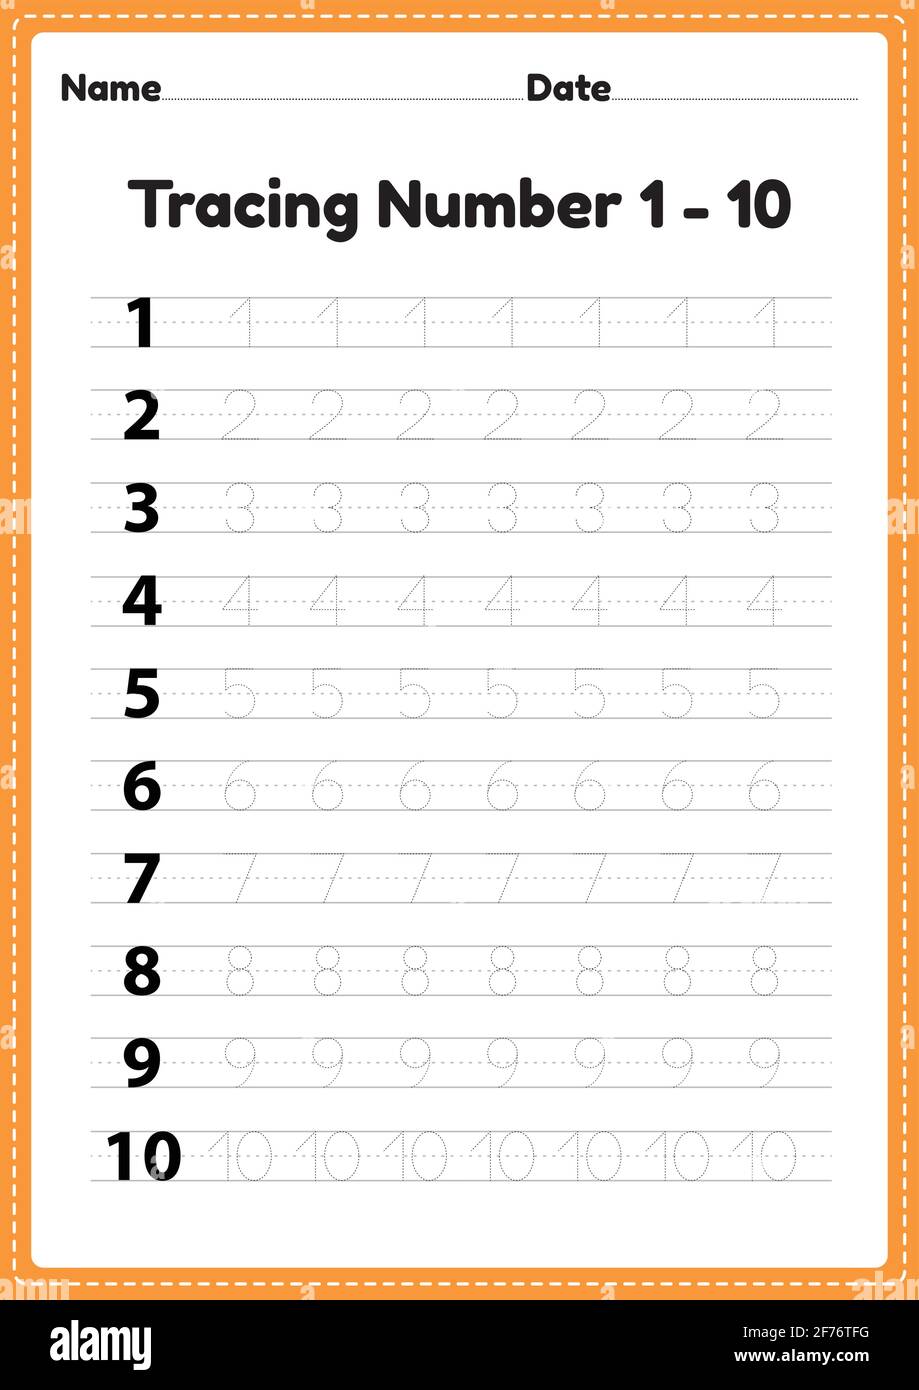 tracing number 1 10 worksheet for kindergarten and preschool kids for educational handwriting practice in a printable page stock vector image art alamy